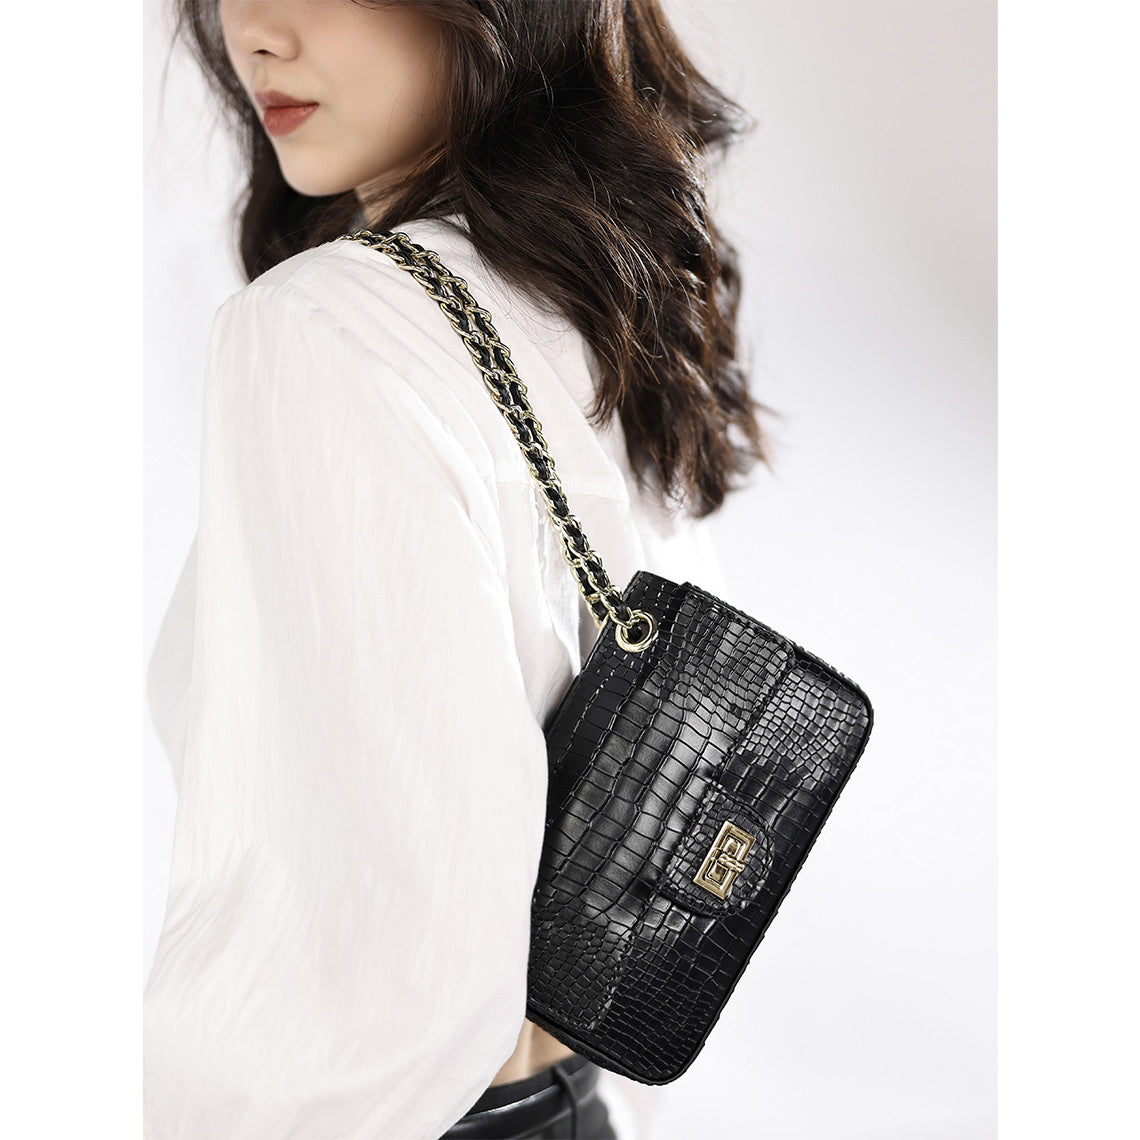 Women Shoulder Bag with Gold Chain | Crocodile Leather Bag - POPSEWING™